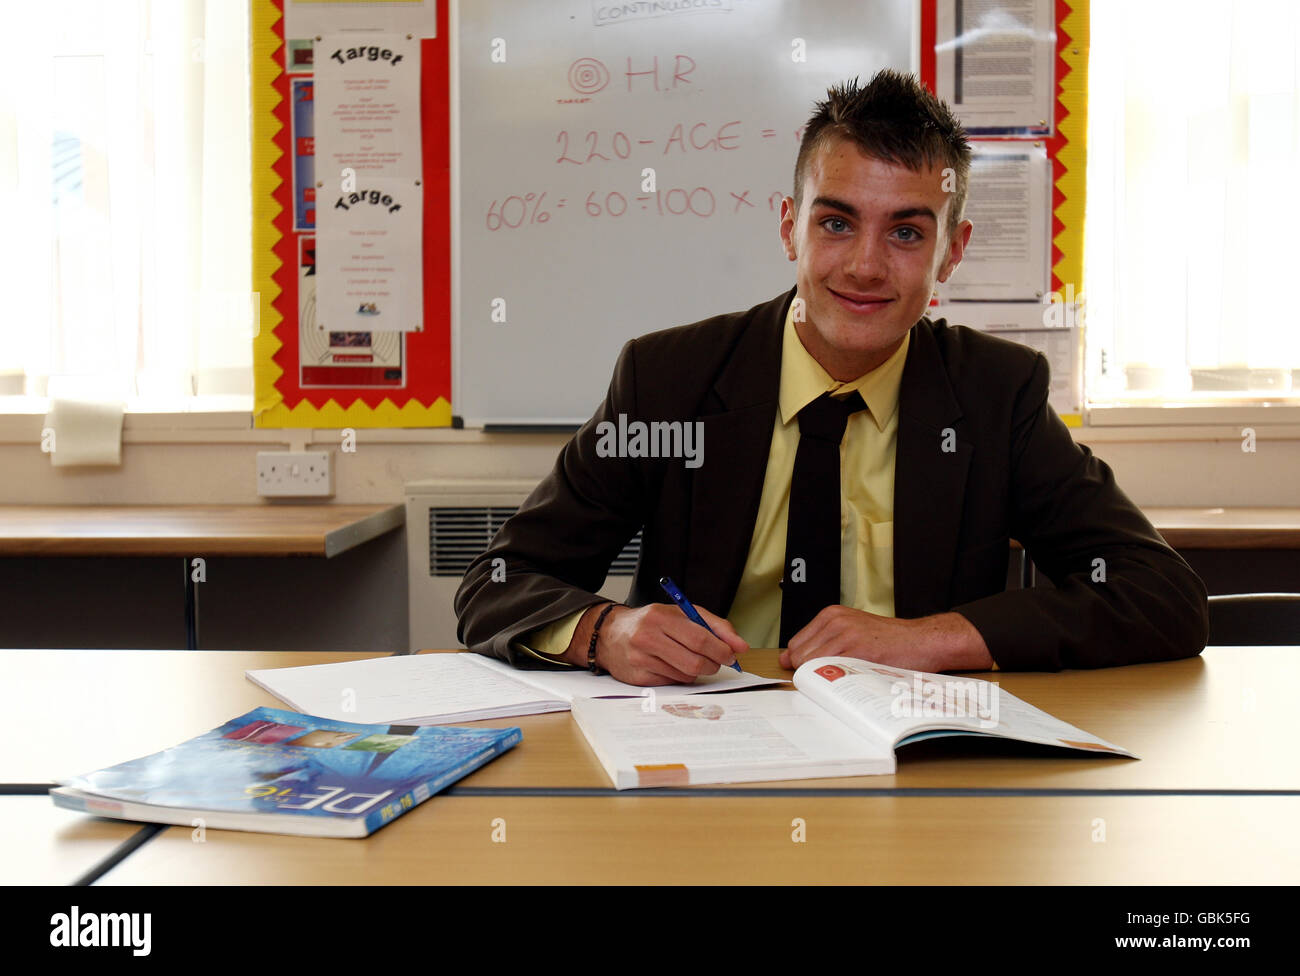 16 year old Richard Peniket poses in a class room at Haybridge High School, Hagley. He has already scored a hat trick for Manchester United Youth team and had just signed a professional contract with Fulham. Wednesday April 29 2009. PA Photo : David Davies. Stock Photo